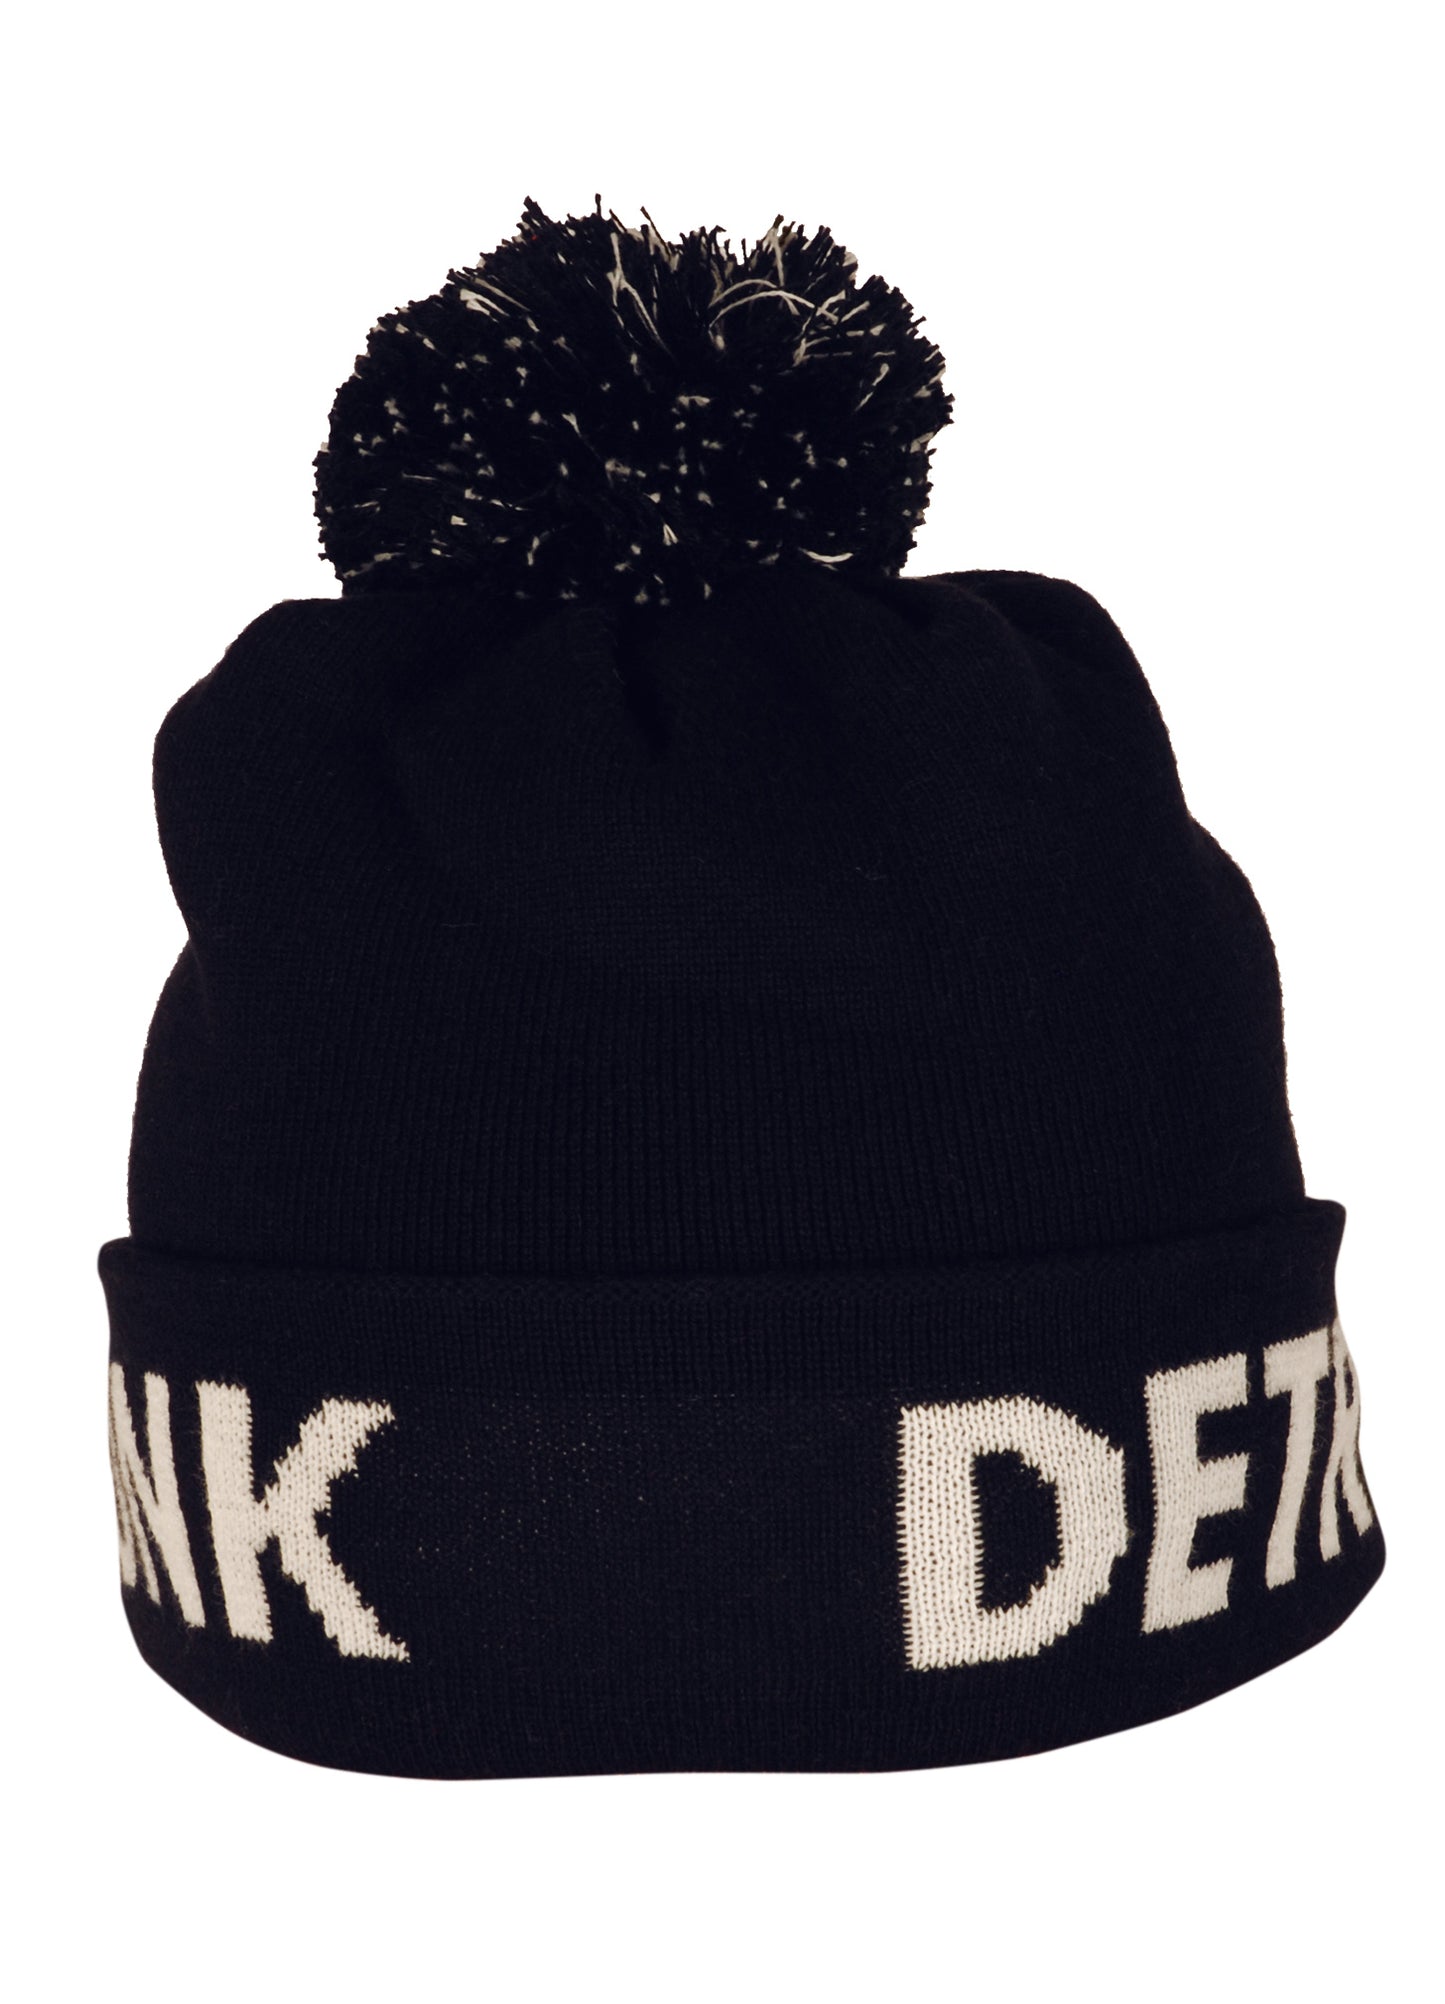 KRONK Detroit Bobble Hat Navy with White knitted logo